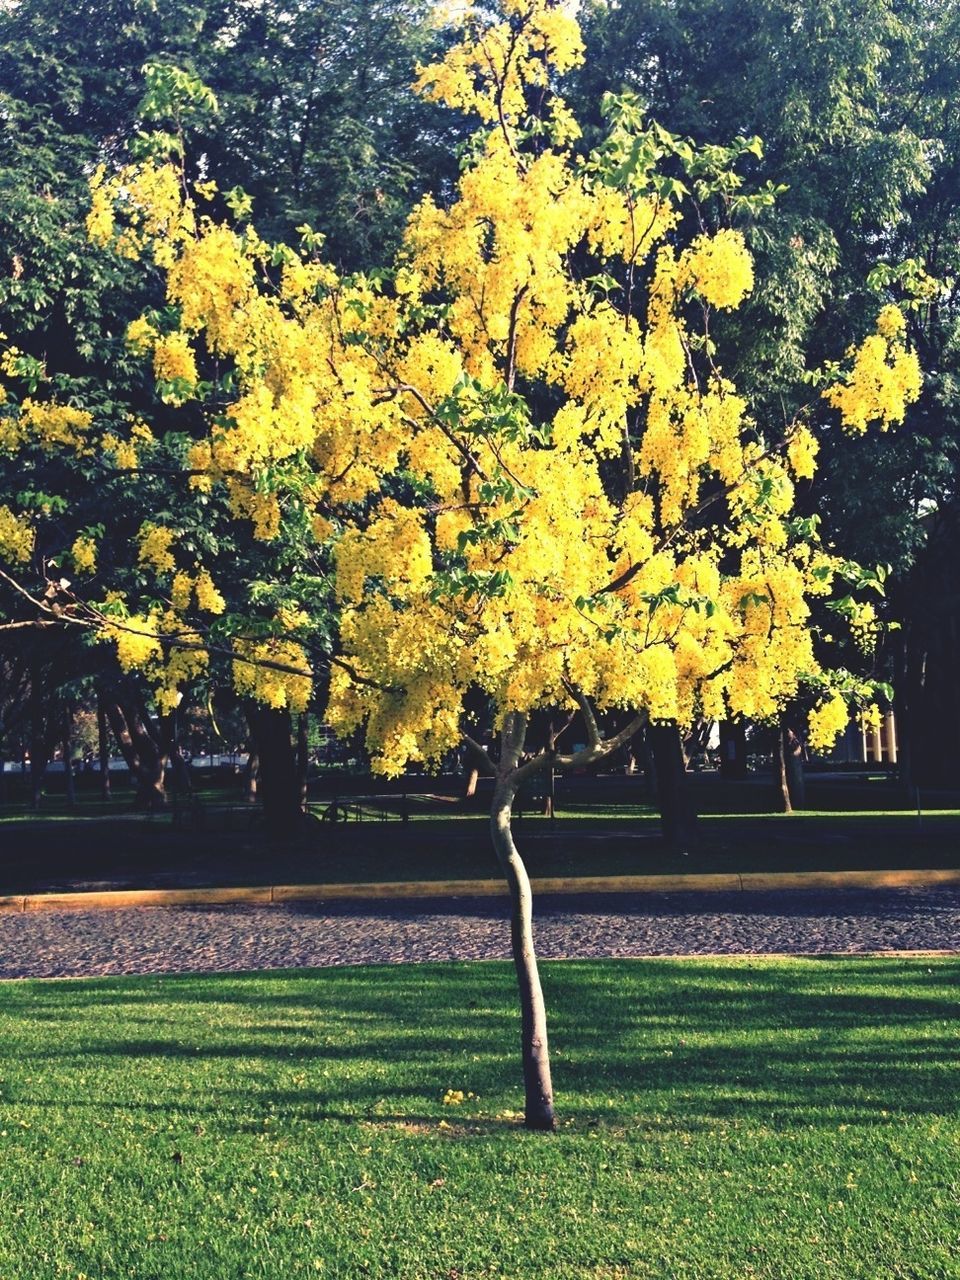 flower, yellow, tree, growth, park - man made space, beauty in nature, grass, freshness, nature, field, green color, tranquility, plant, garden, fragility, park, formal garden, outdoors, blossom, lawn